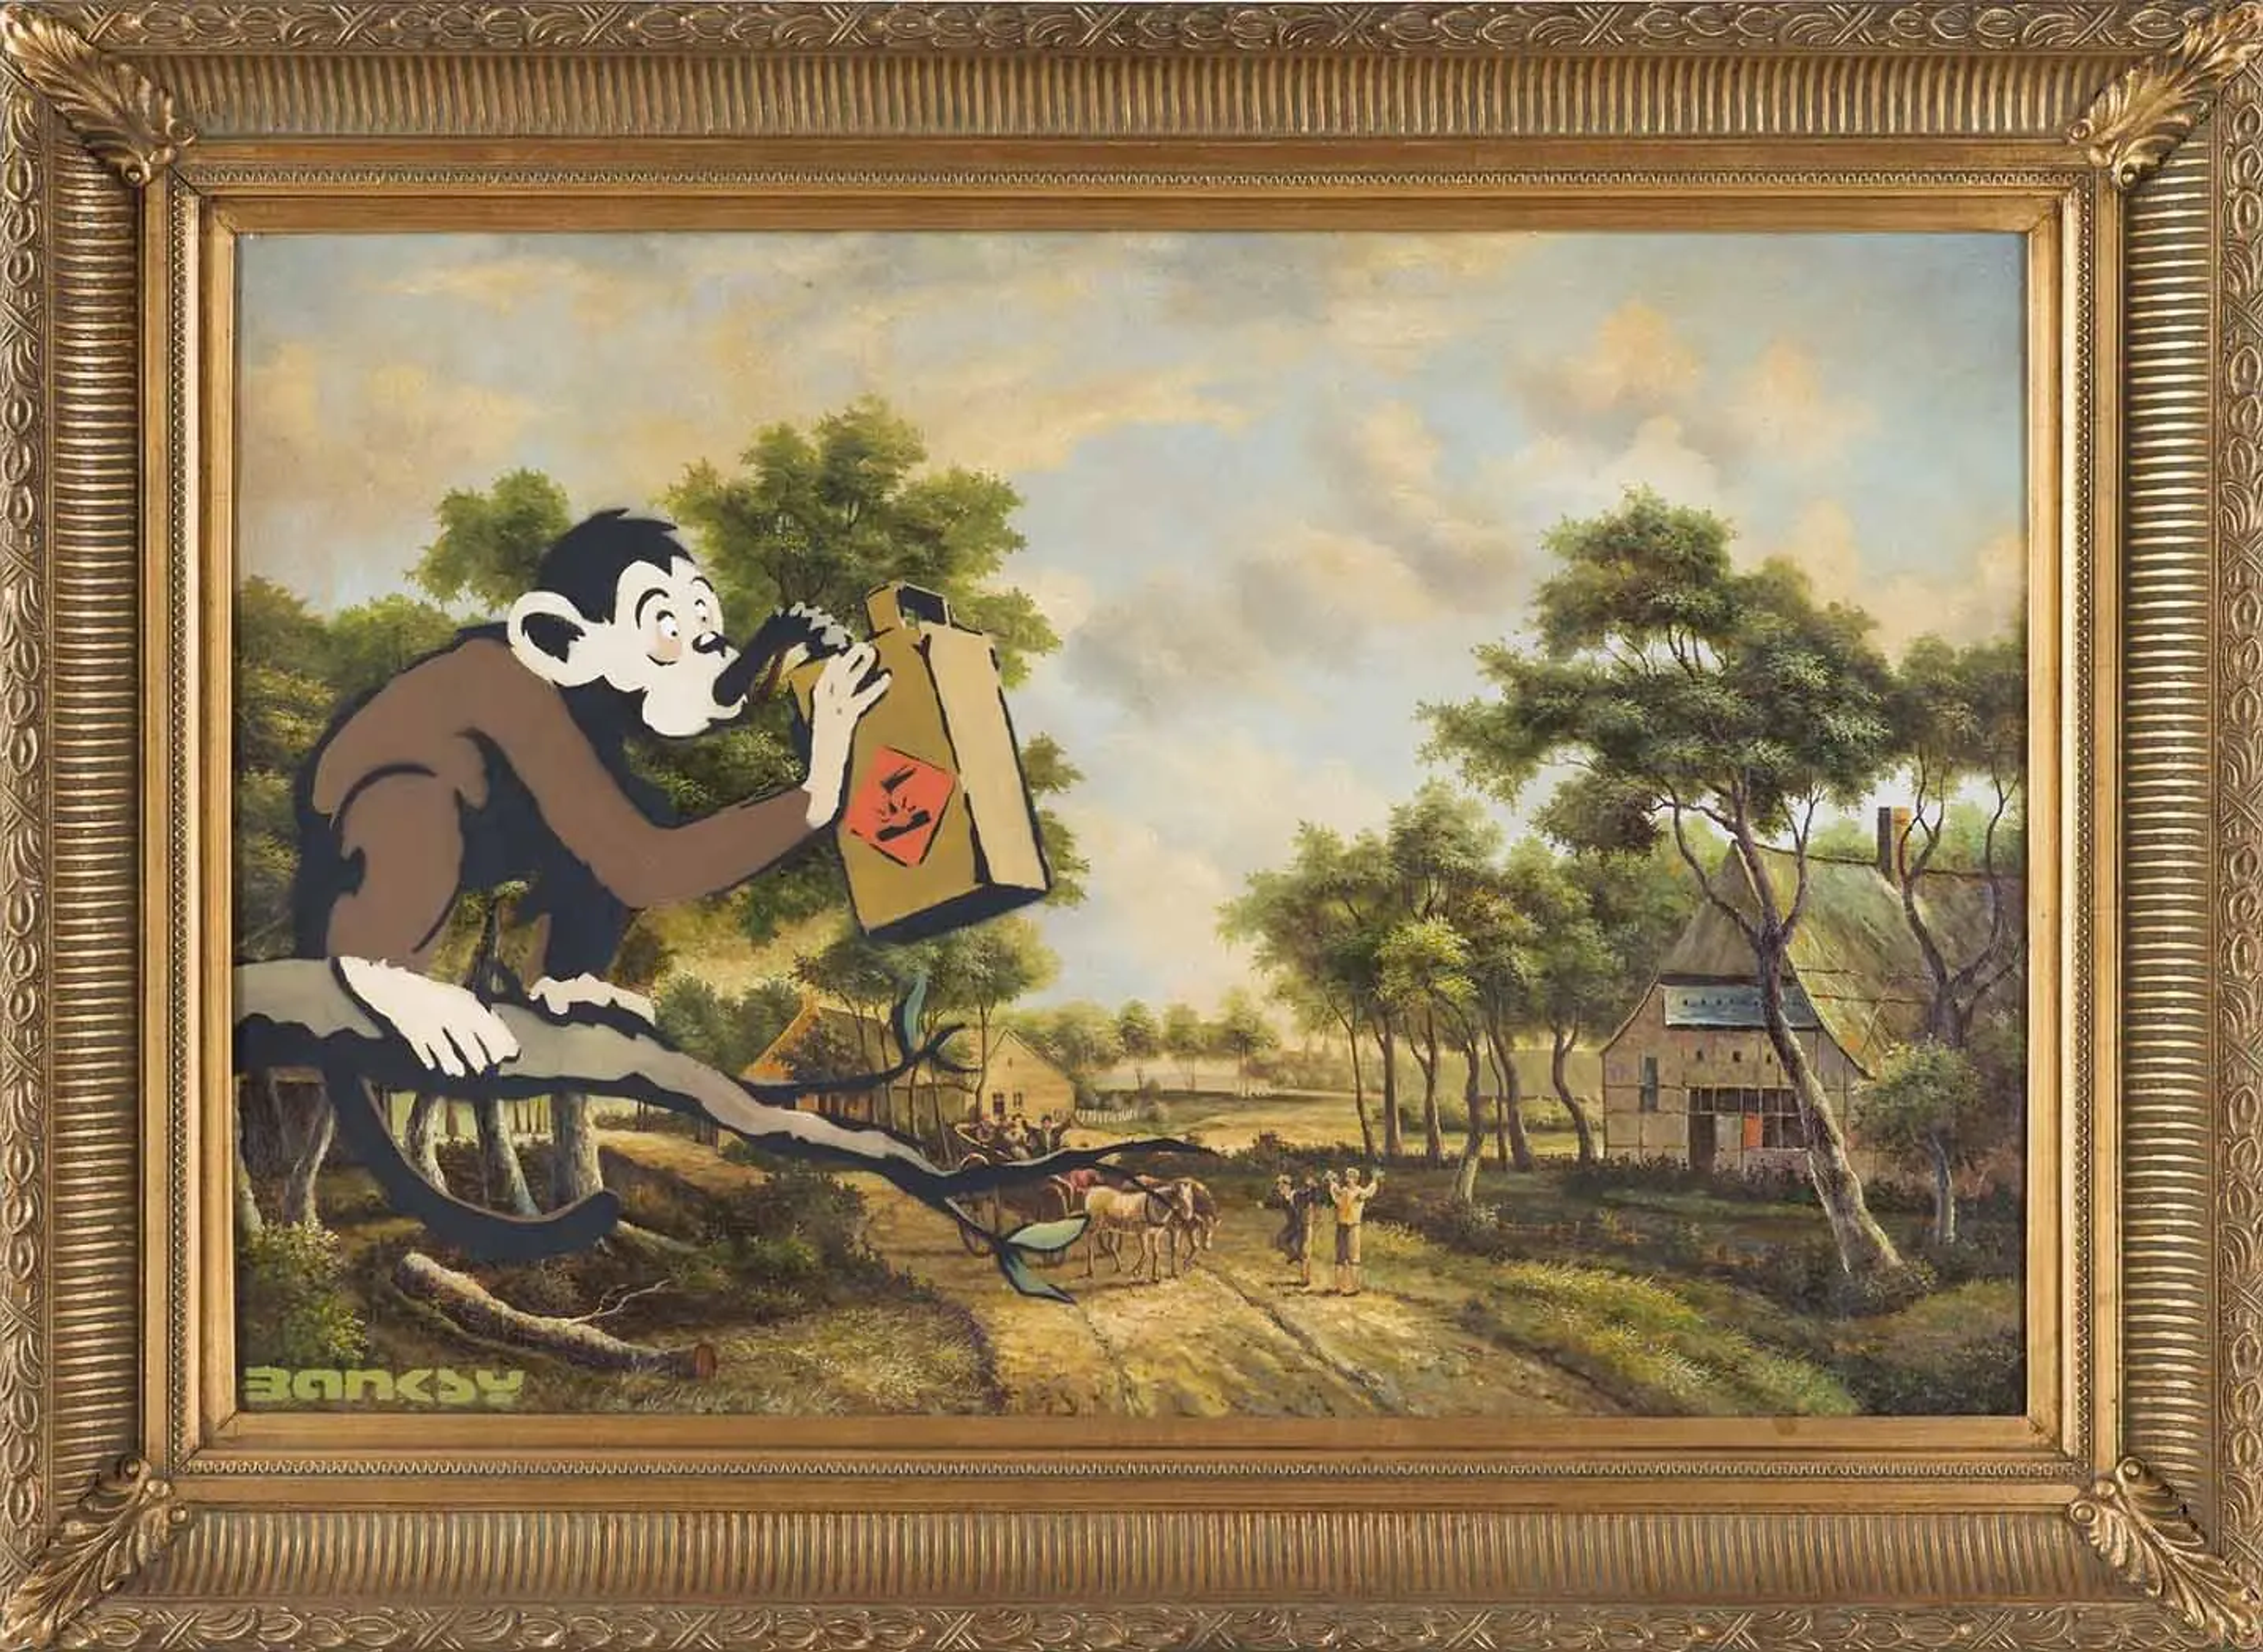 Sitting on a branch of a tree, a monkey is seen drinking gasoline from a carton labelled with a flammable sign. With its eyes wide-open, the creature appears unaware of the poisonousness of the fuel and, by extension, the self-induced harm. Imposed on an idyllic rural scenery that is the subject matter of the found oil painting, the stencilled image of the monkey embodies the corrupted nature of the modern world. 